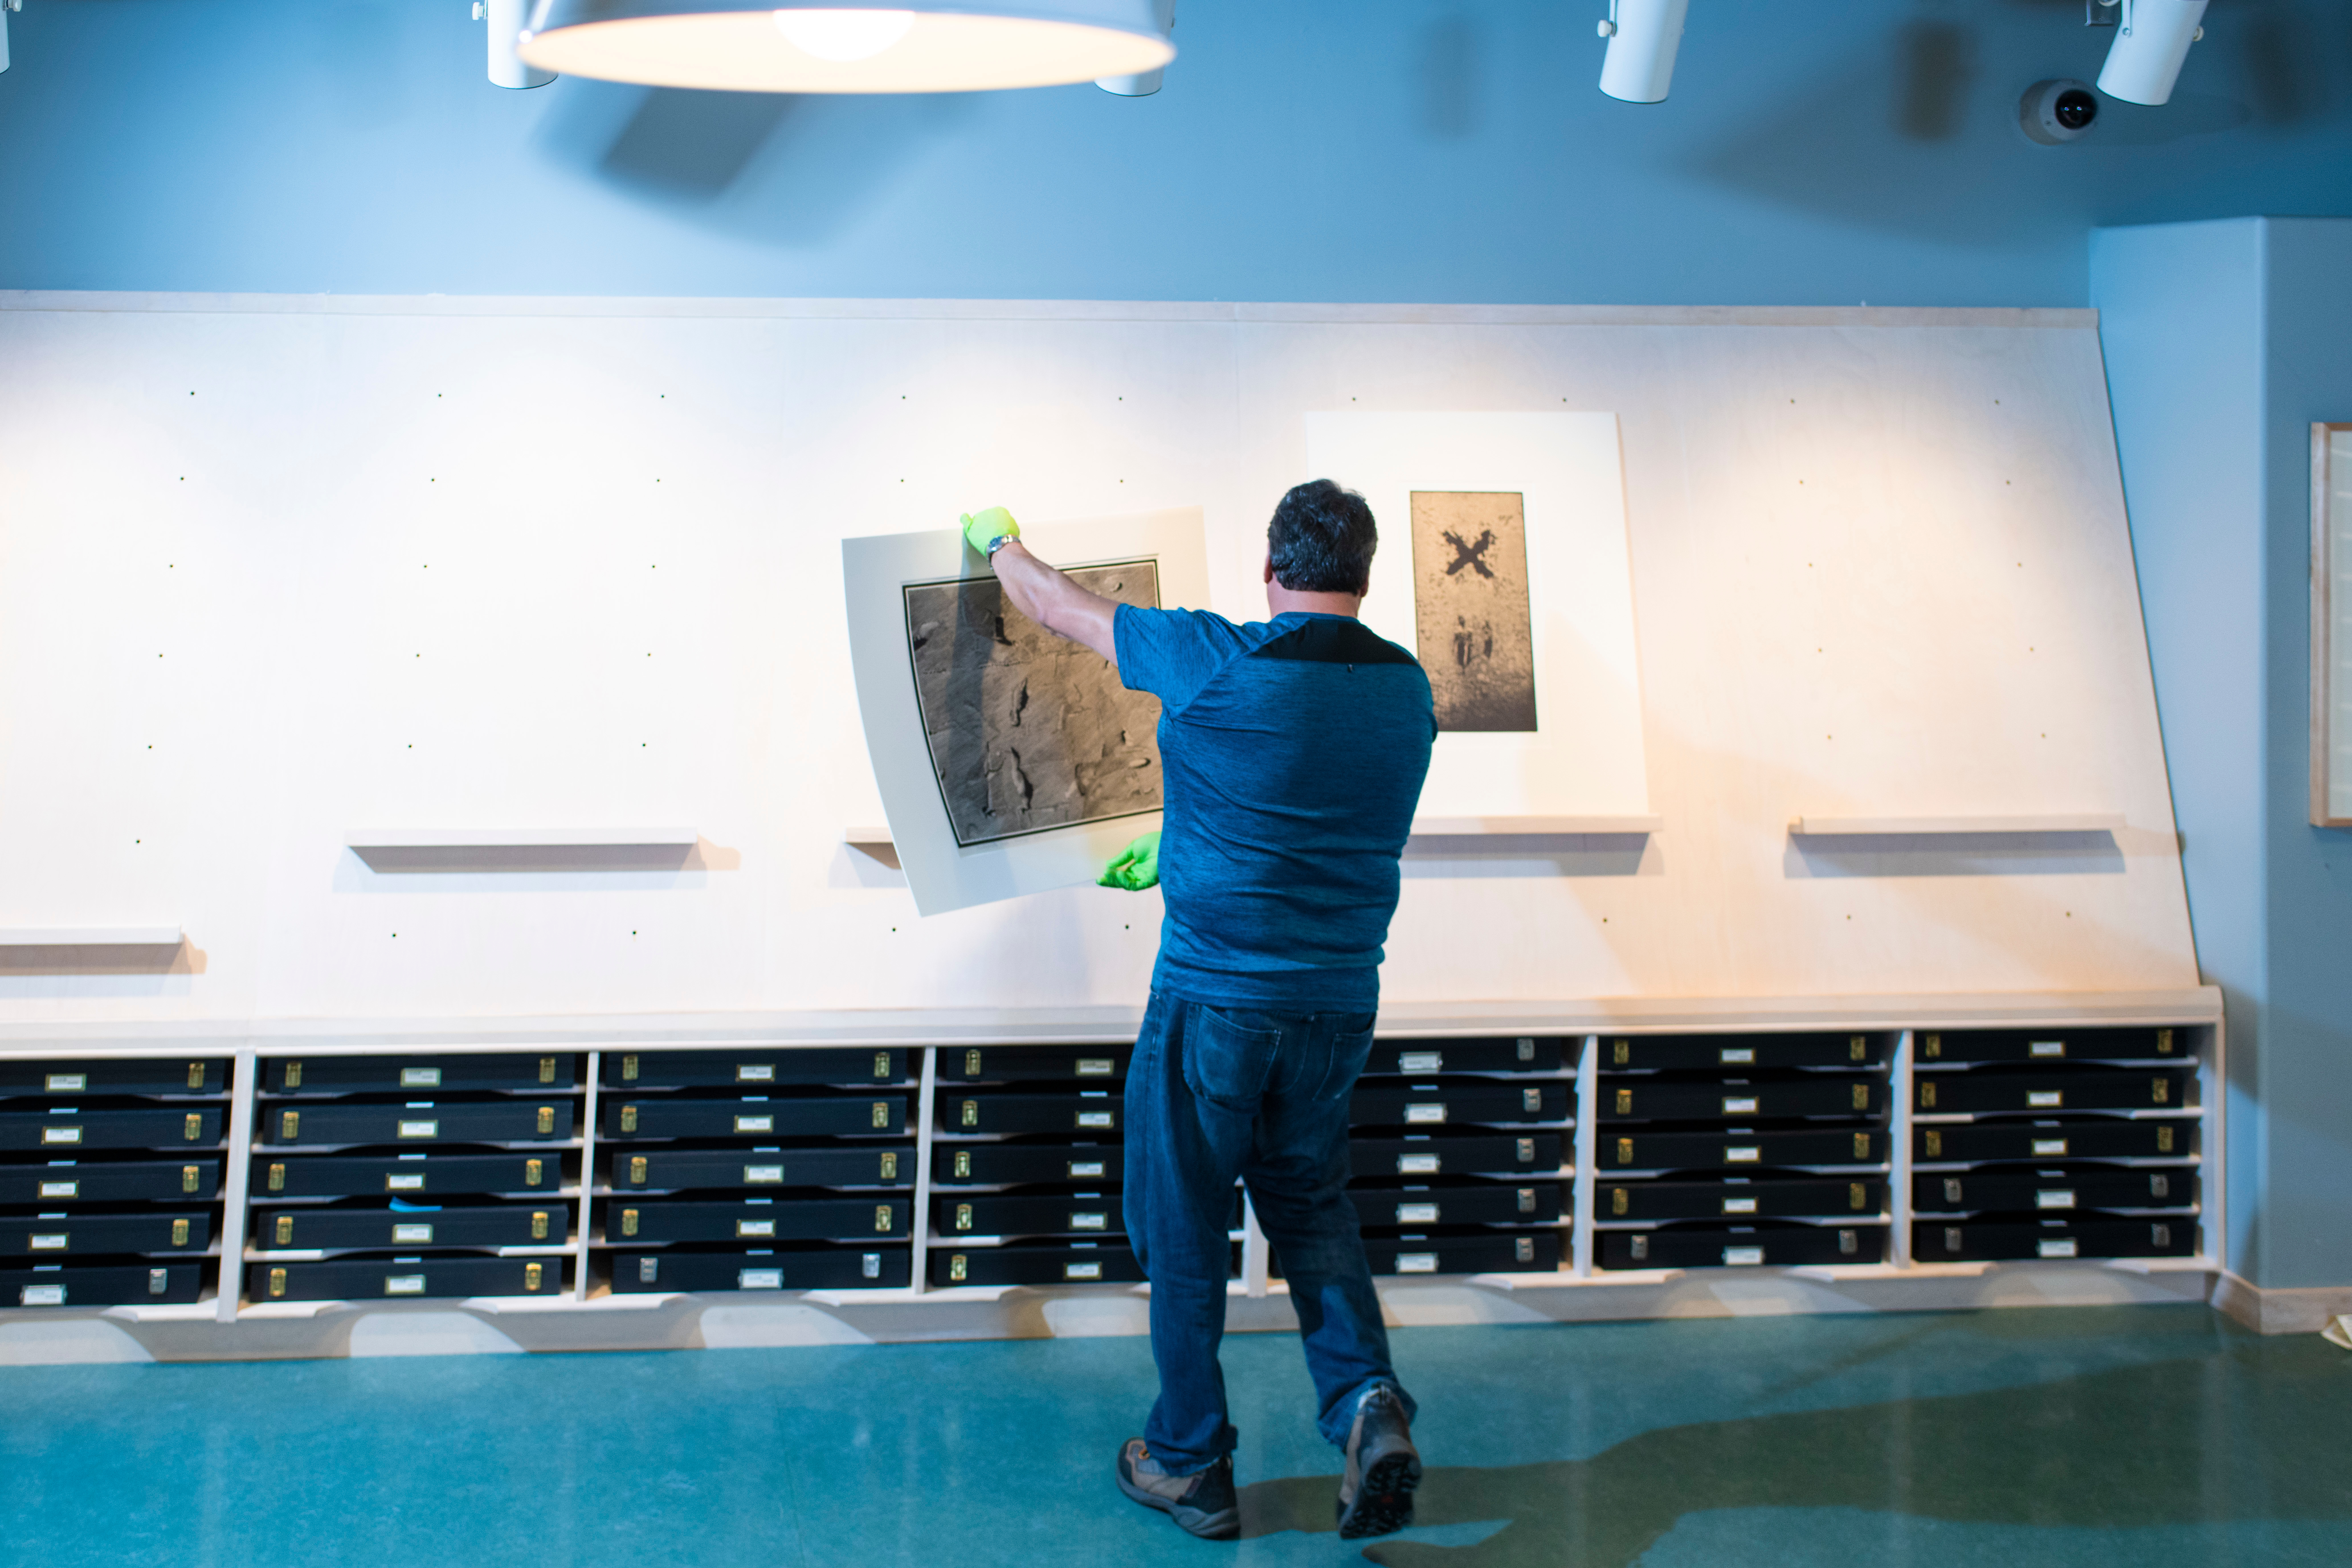 A man wearing a blue shirt and jeans stands facing towards a wall with rows of black boxes. In his arms, he holds a work of art and moves to place it leaning against the wall.